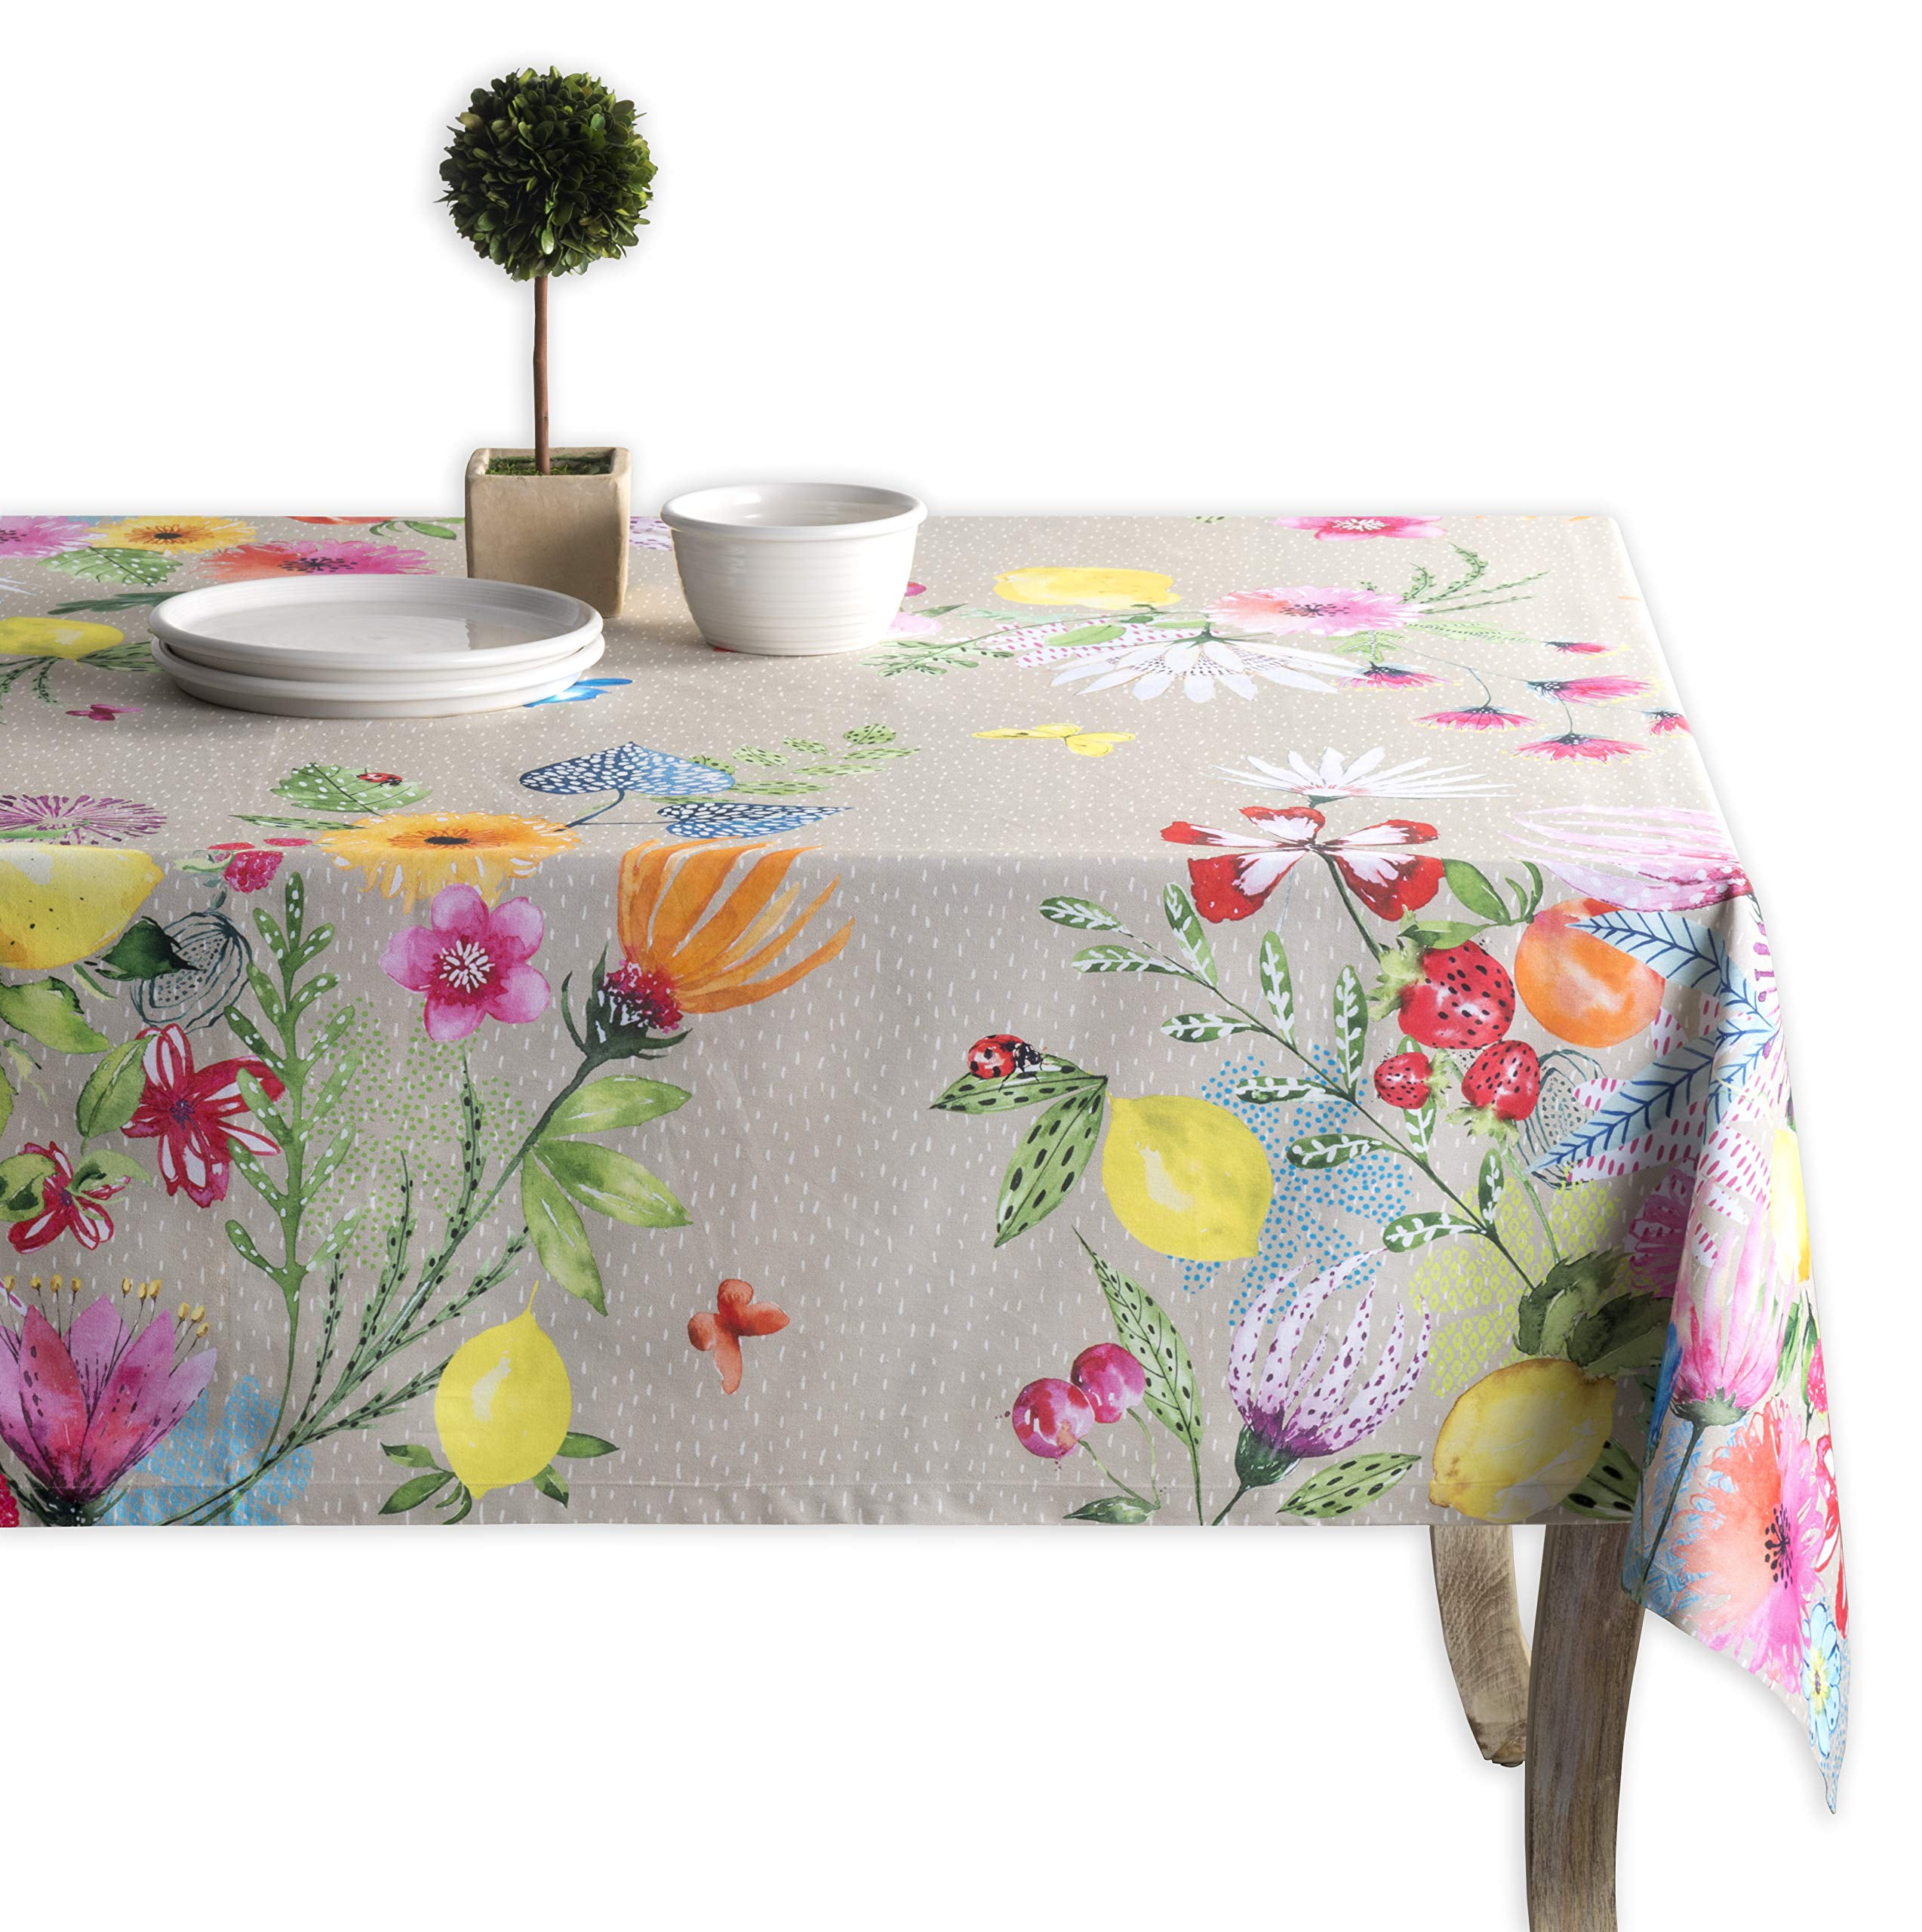 Details about   Spring Meadow Damask Linens Pick Cloth Napkins OR Tablecloths Pink Flowers 